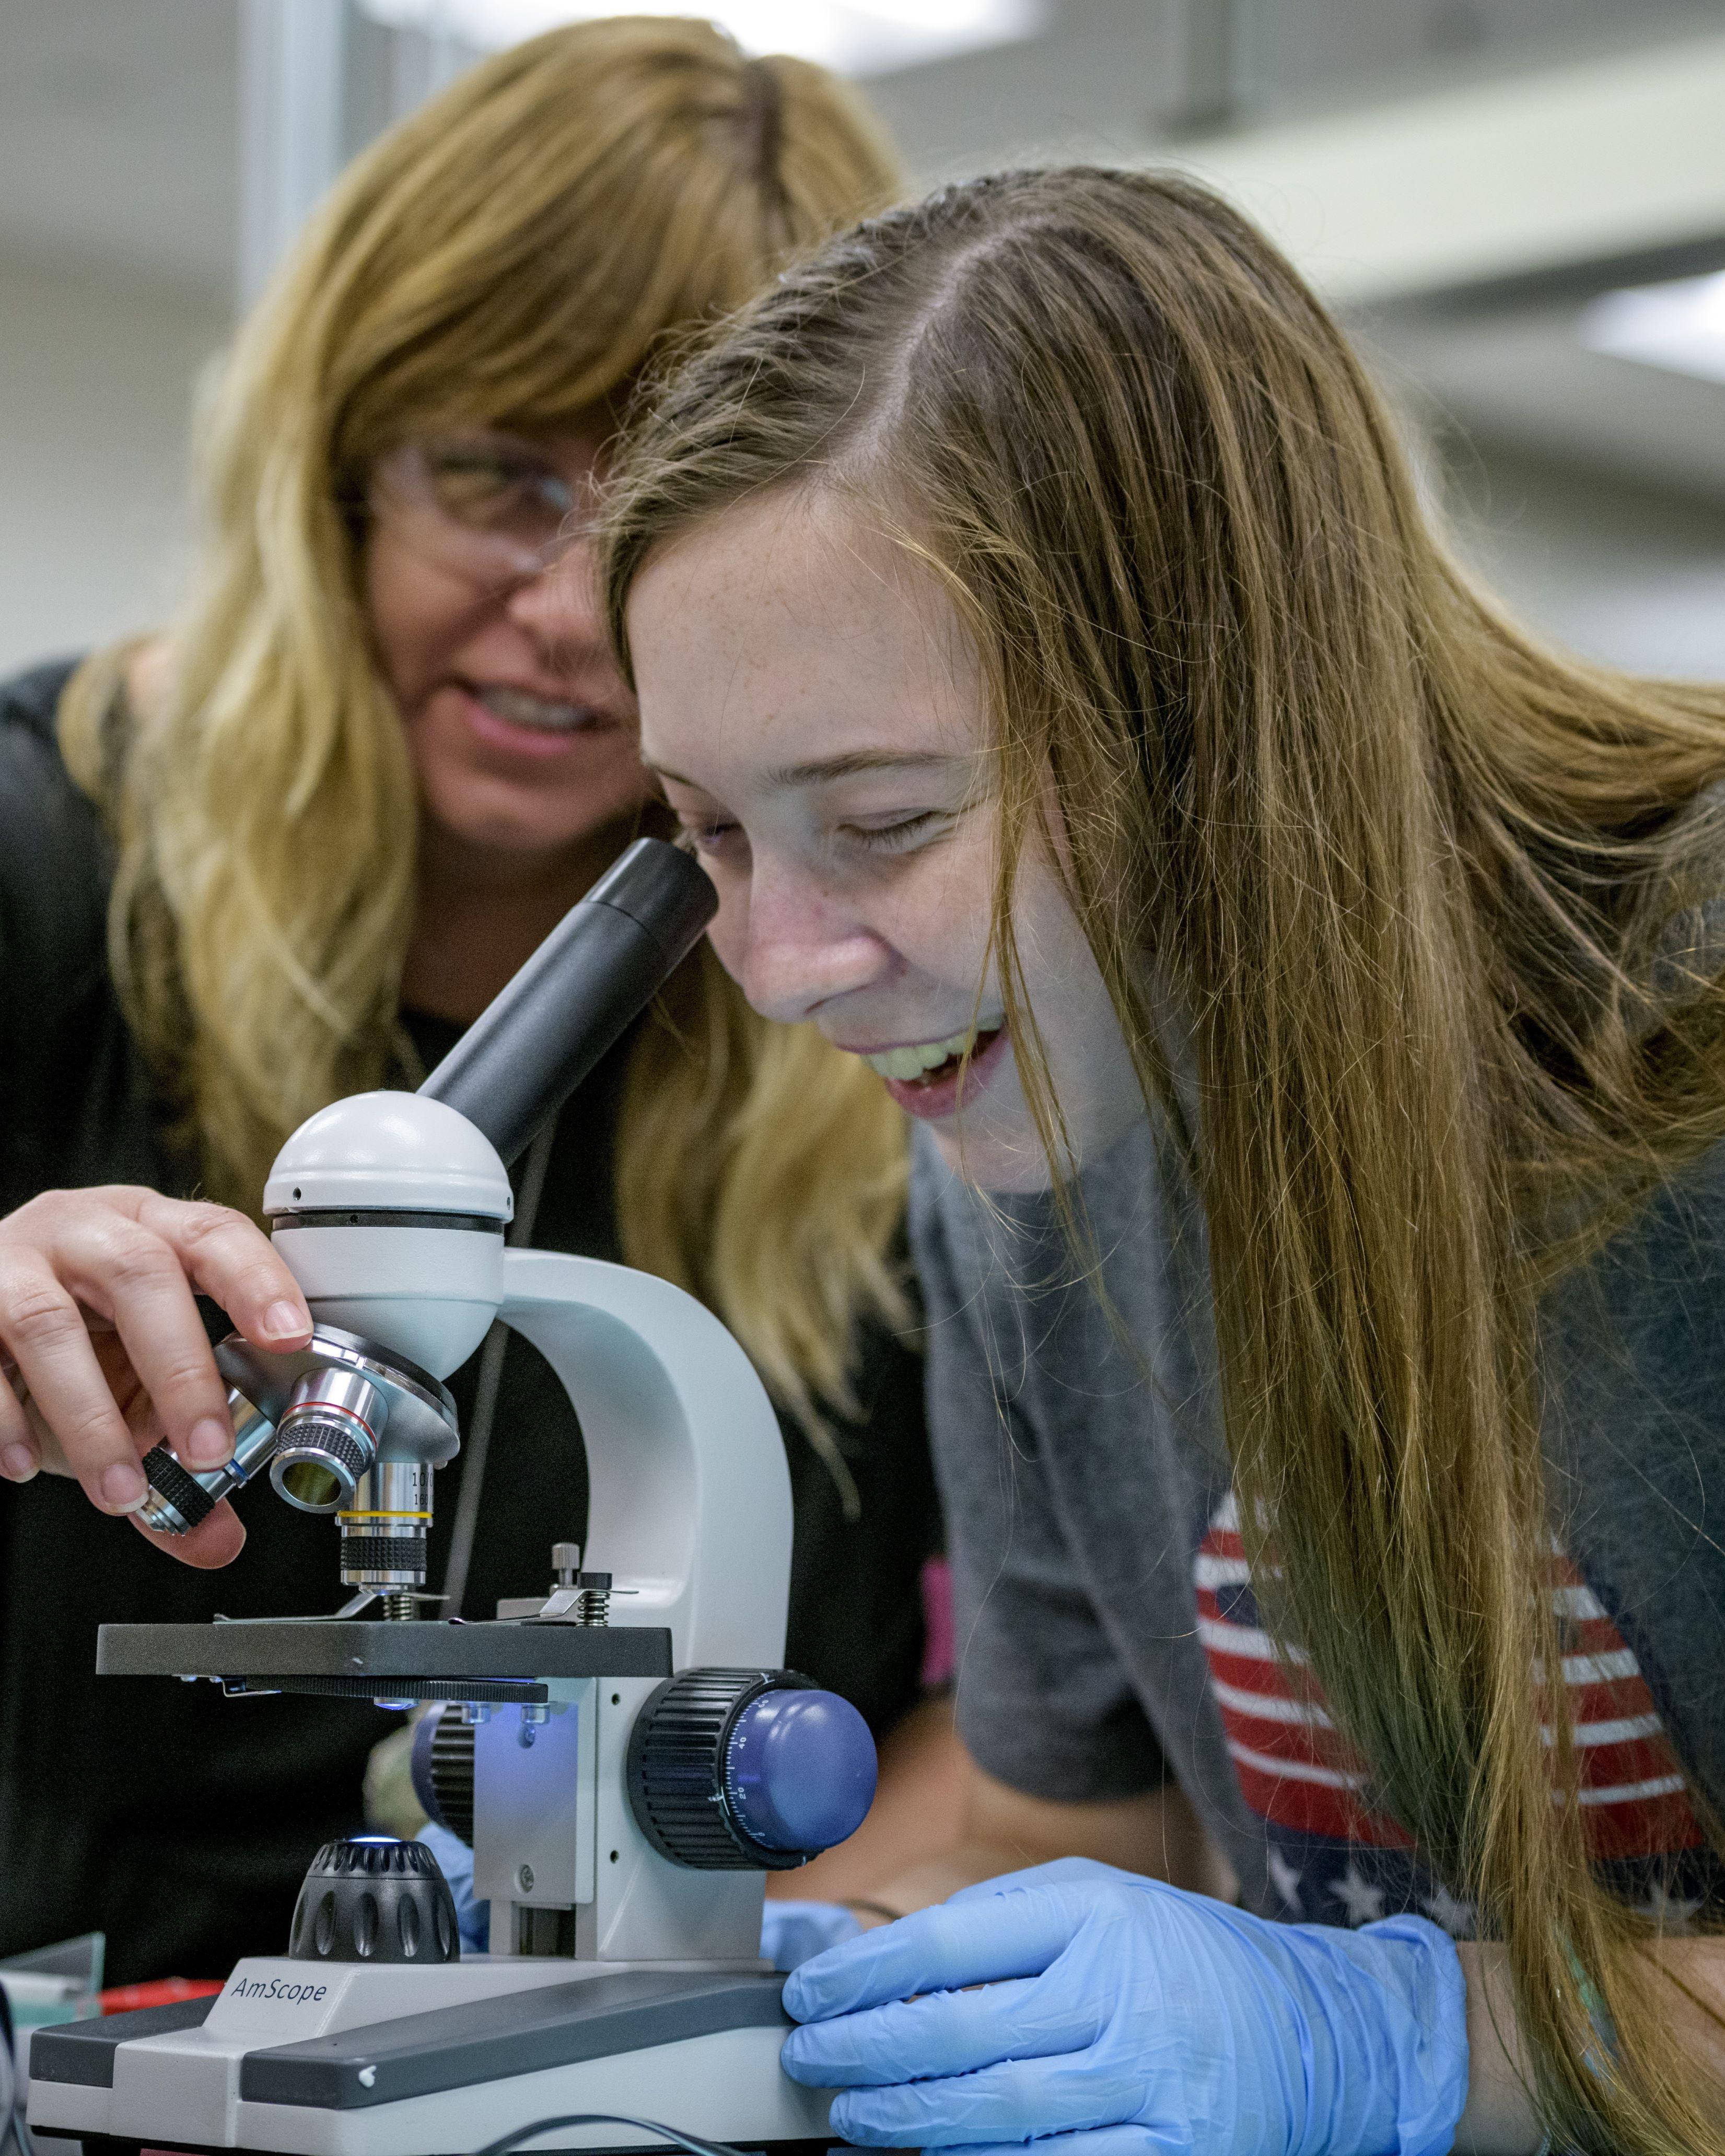 Student looking through a microscope with the help of a professor